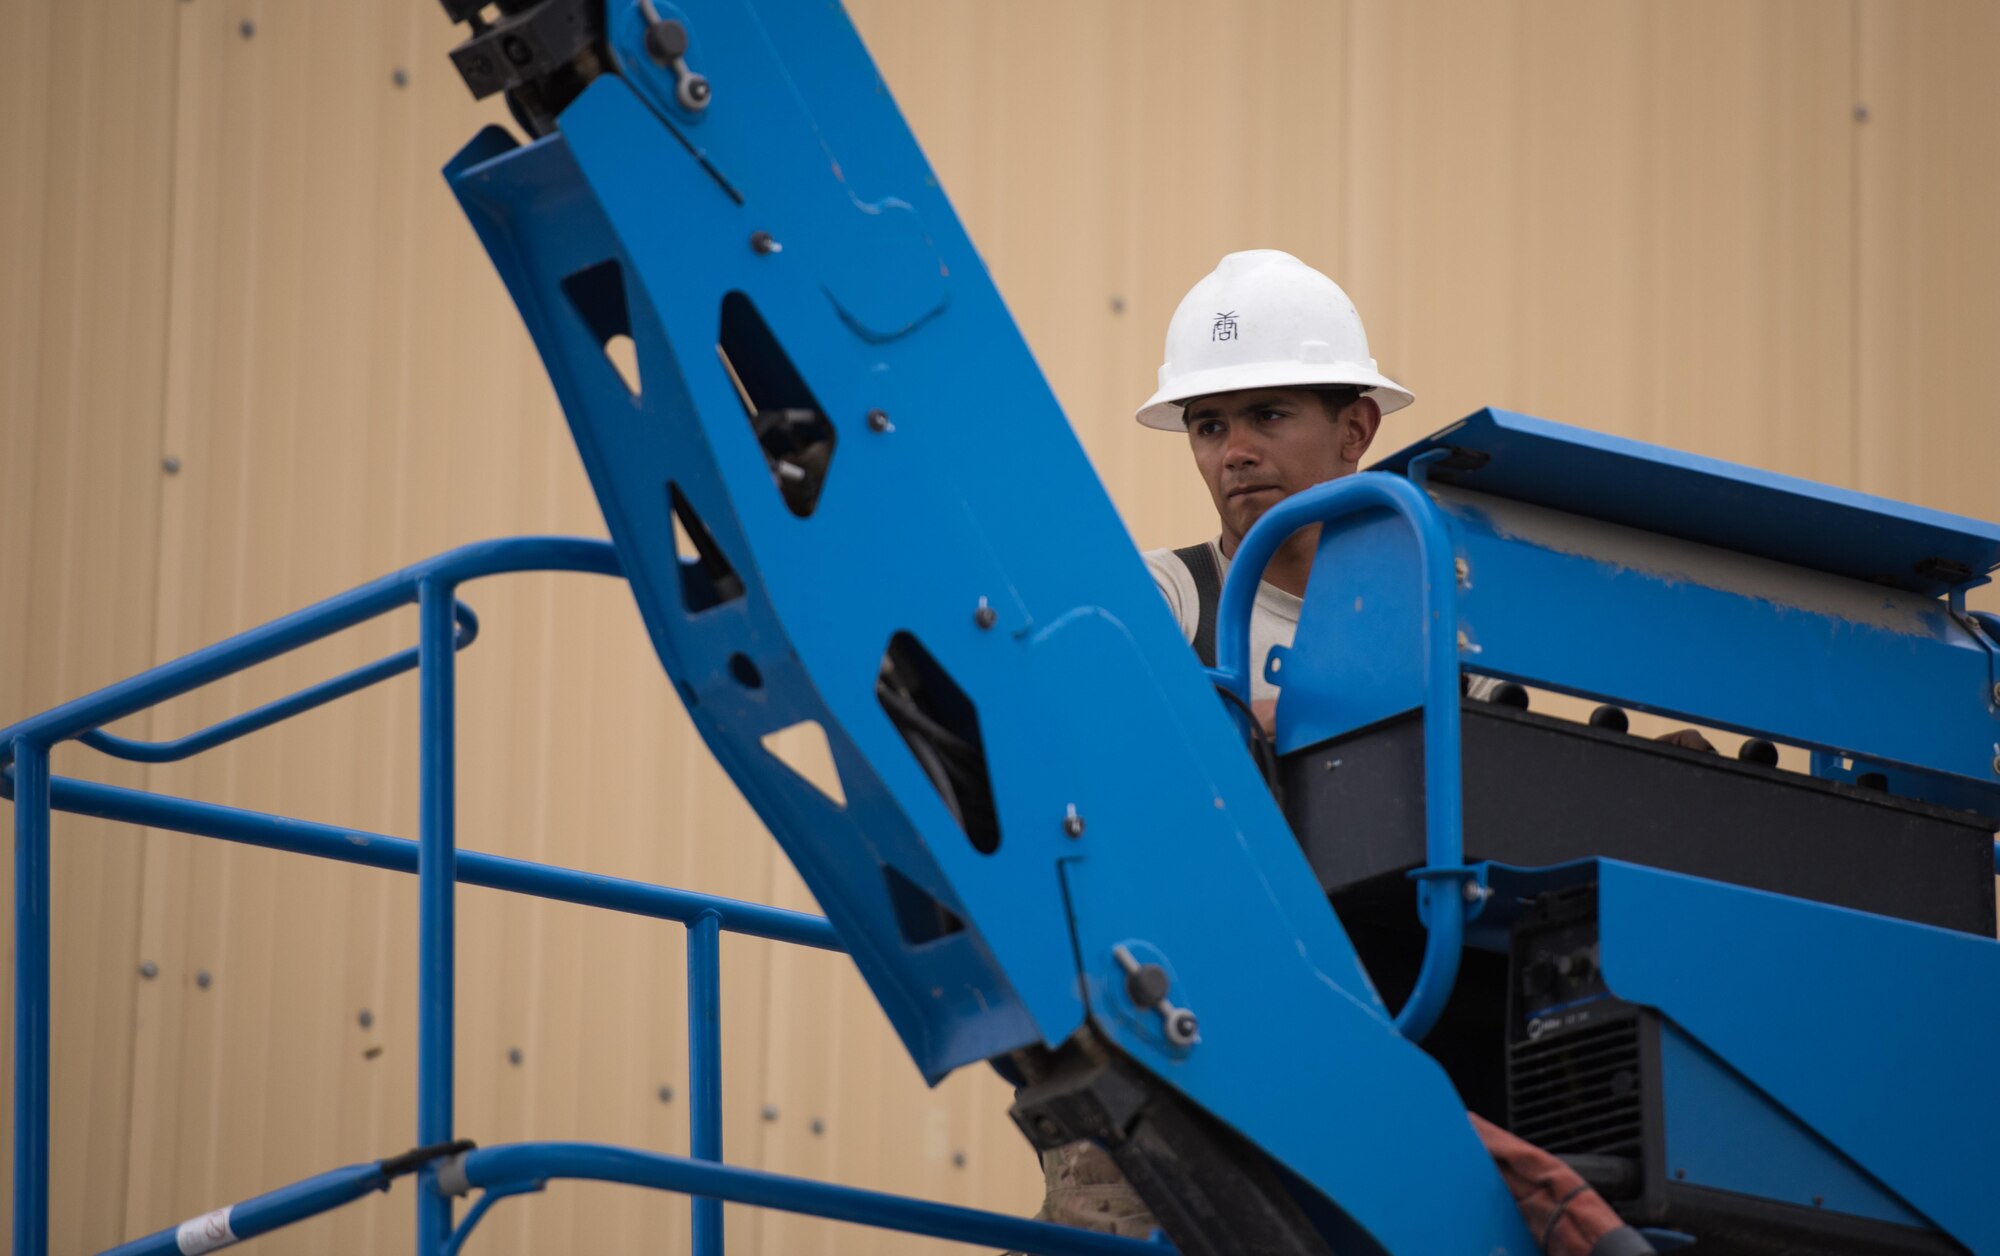 Senior Airman Peter Palacios, a 455th Expeditionary Civil Engineer Squadron electrical systems journeyman, operates a boom lift at Bagram Airfield, Afghanistan, May 12, 2017. Electricians are responsible for installing, repairing and maintaining electrical networks, ensuring that the primary source of energy for the installation is always available. (U.S. Air Force photo by Staff Sgt. Benjamin Gonsier)